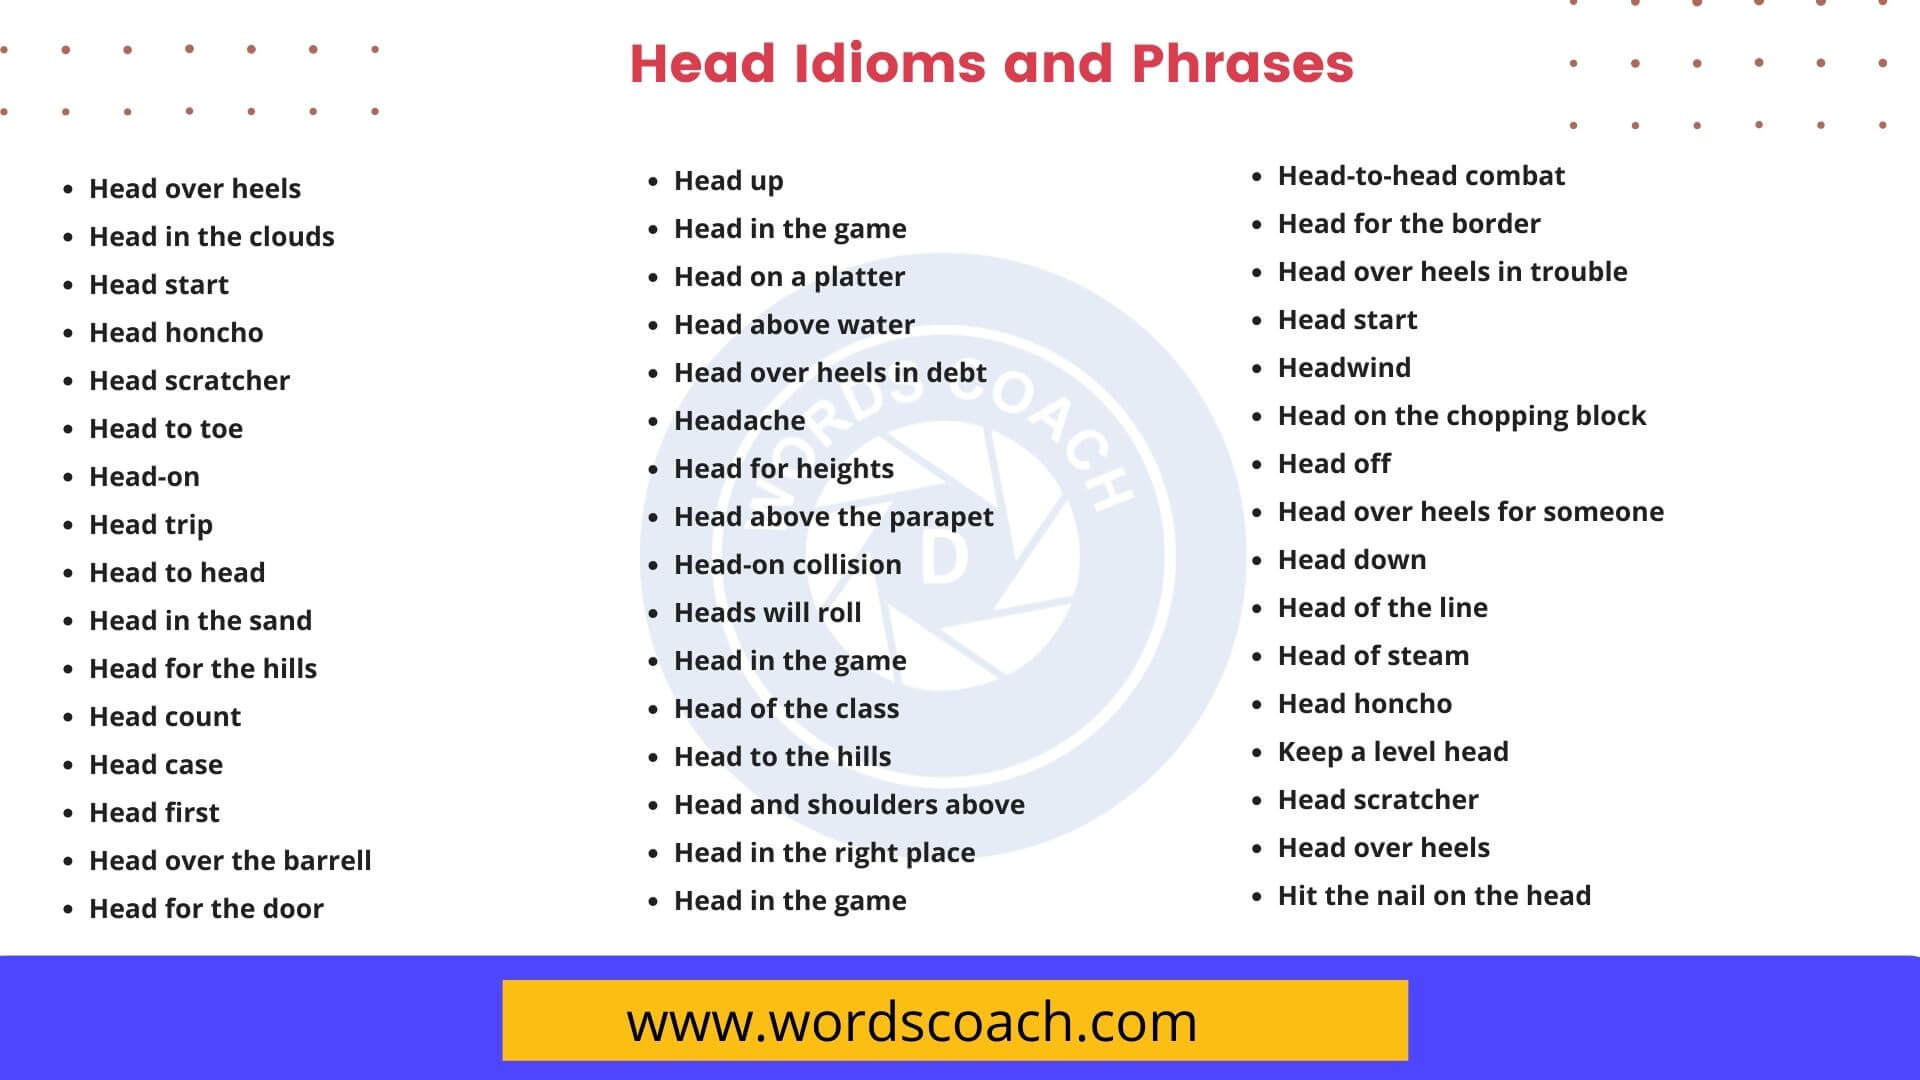 50+ Head Idioms and Phrases - Word Coach